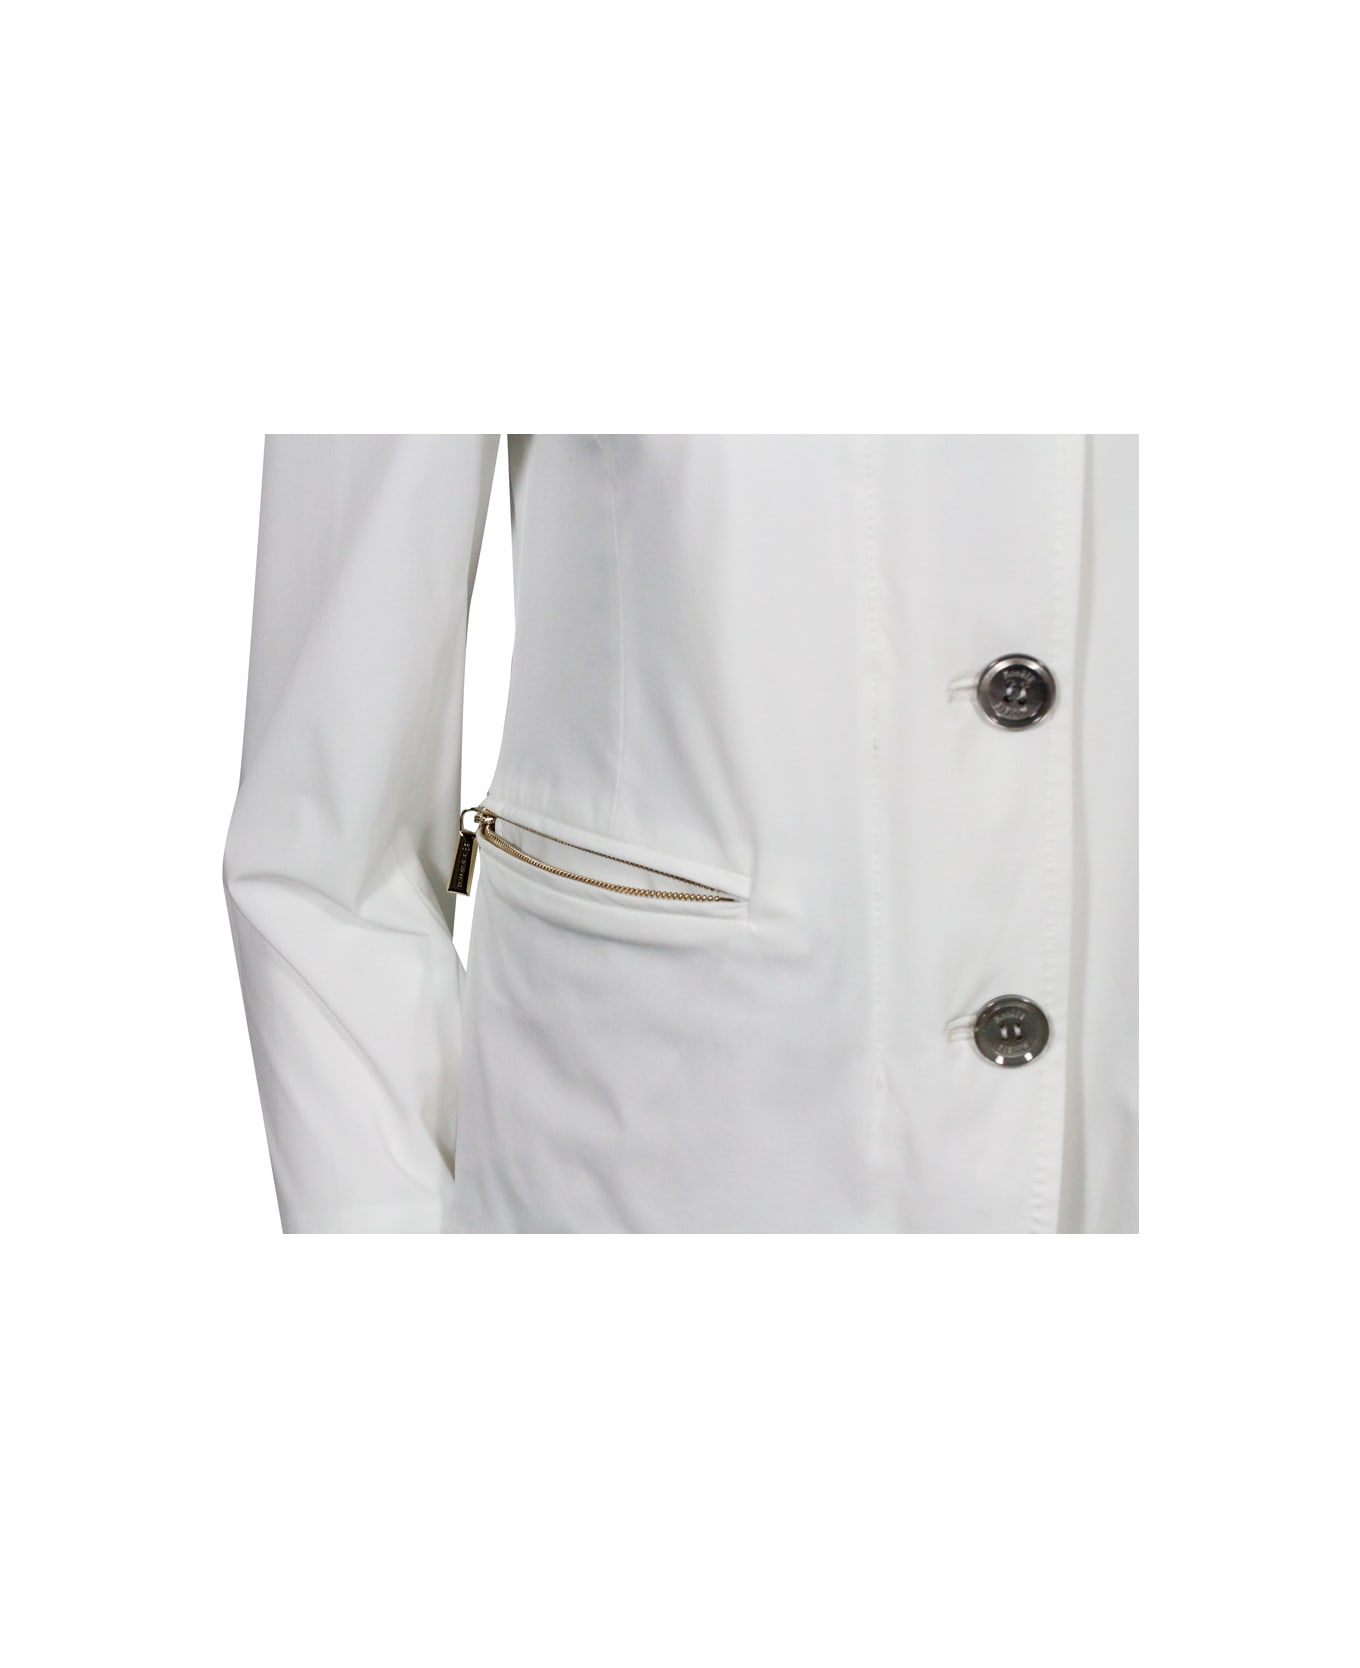 Moorer Blazer In Stretch Technical Fabric With Cotton Jersey Lining. Zip And Button Closure - White